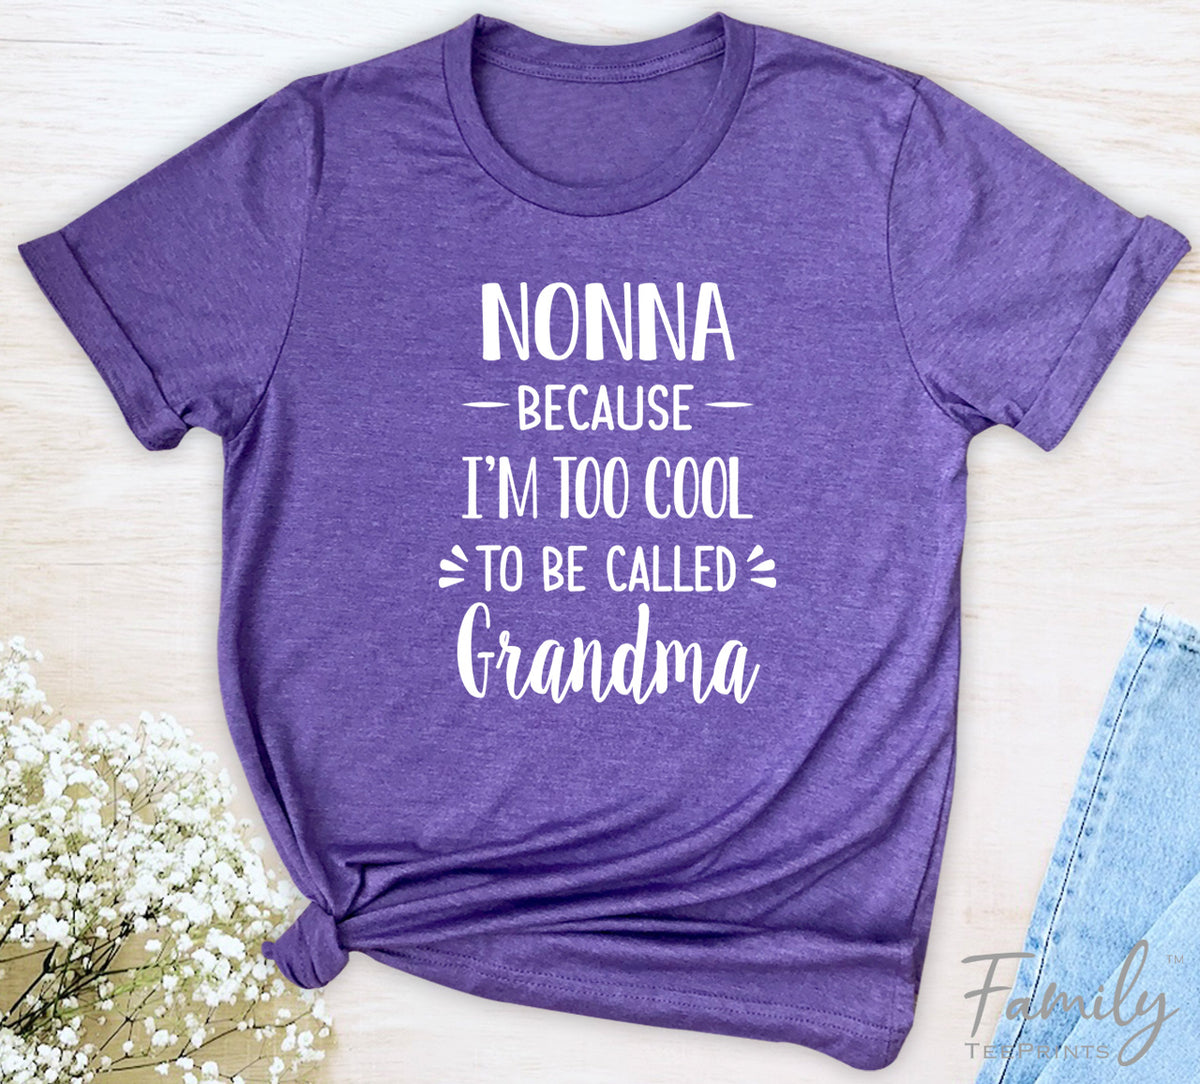 Nonna Because I'm Too Cool ... - Unisex T-shirt - Nonna Shirt - Gift For Nonna - familyteeprints